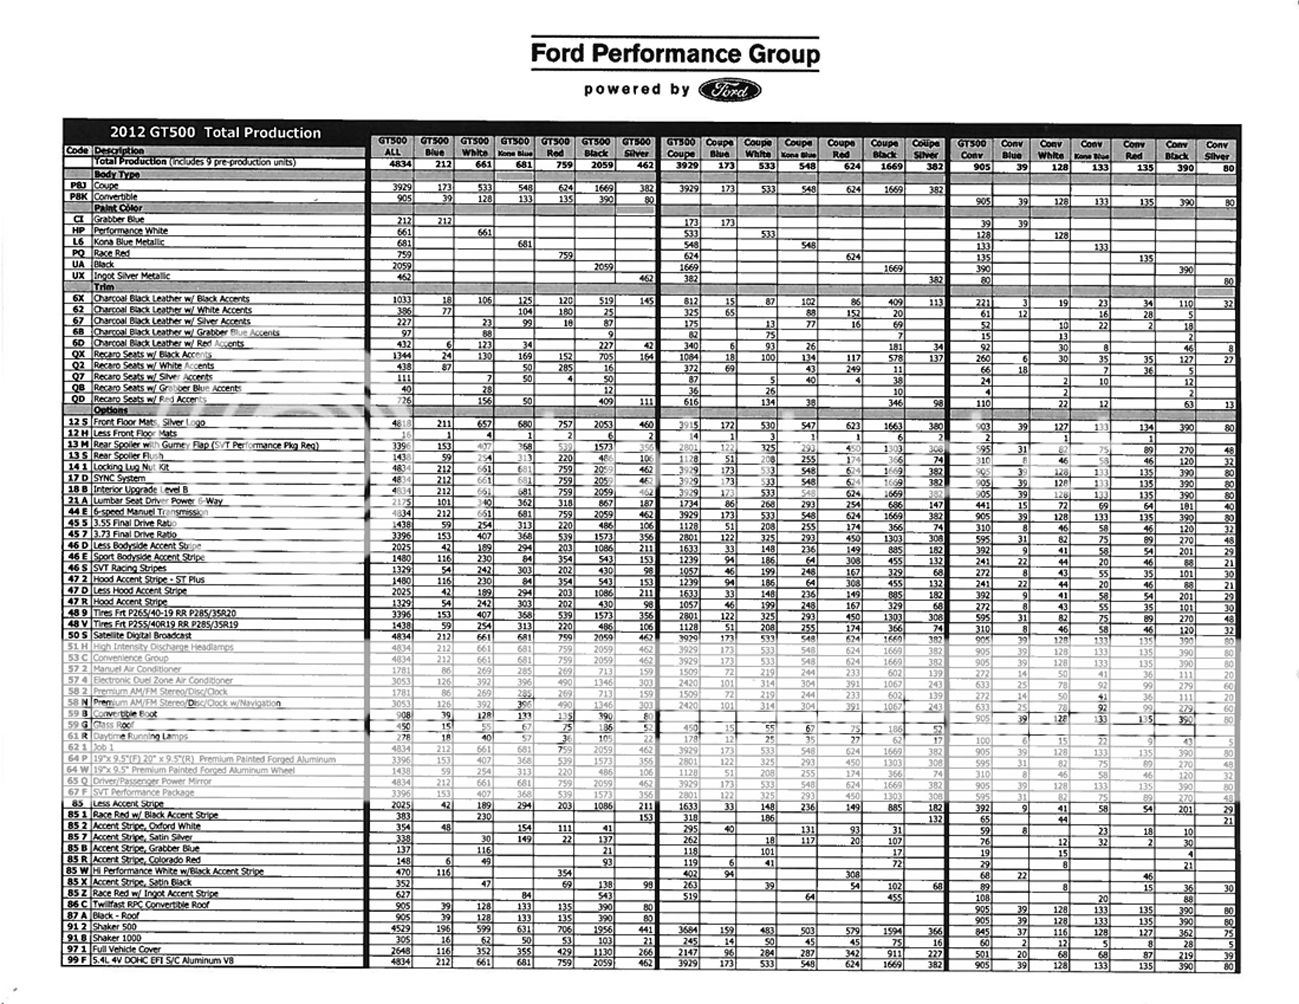 2007 Ford shelby production numbers #5